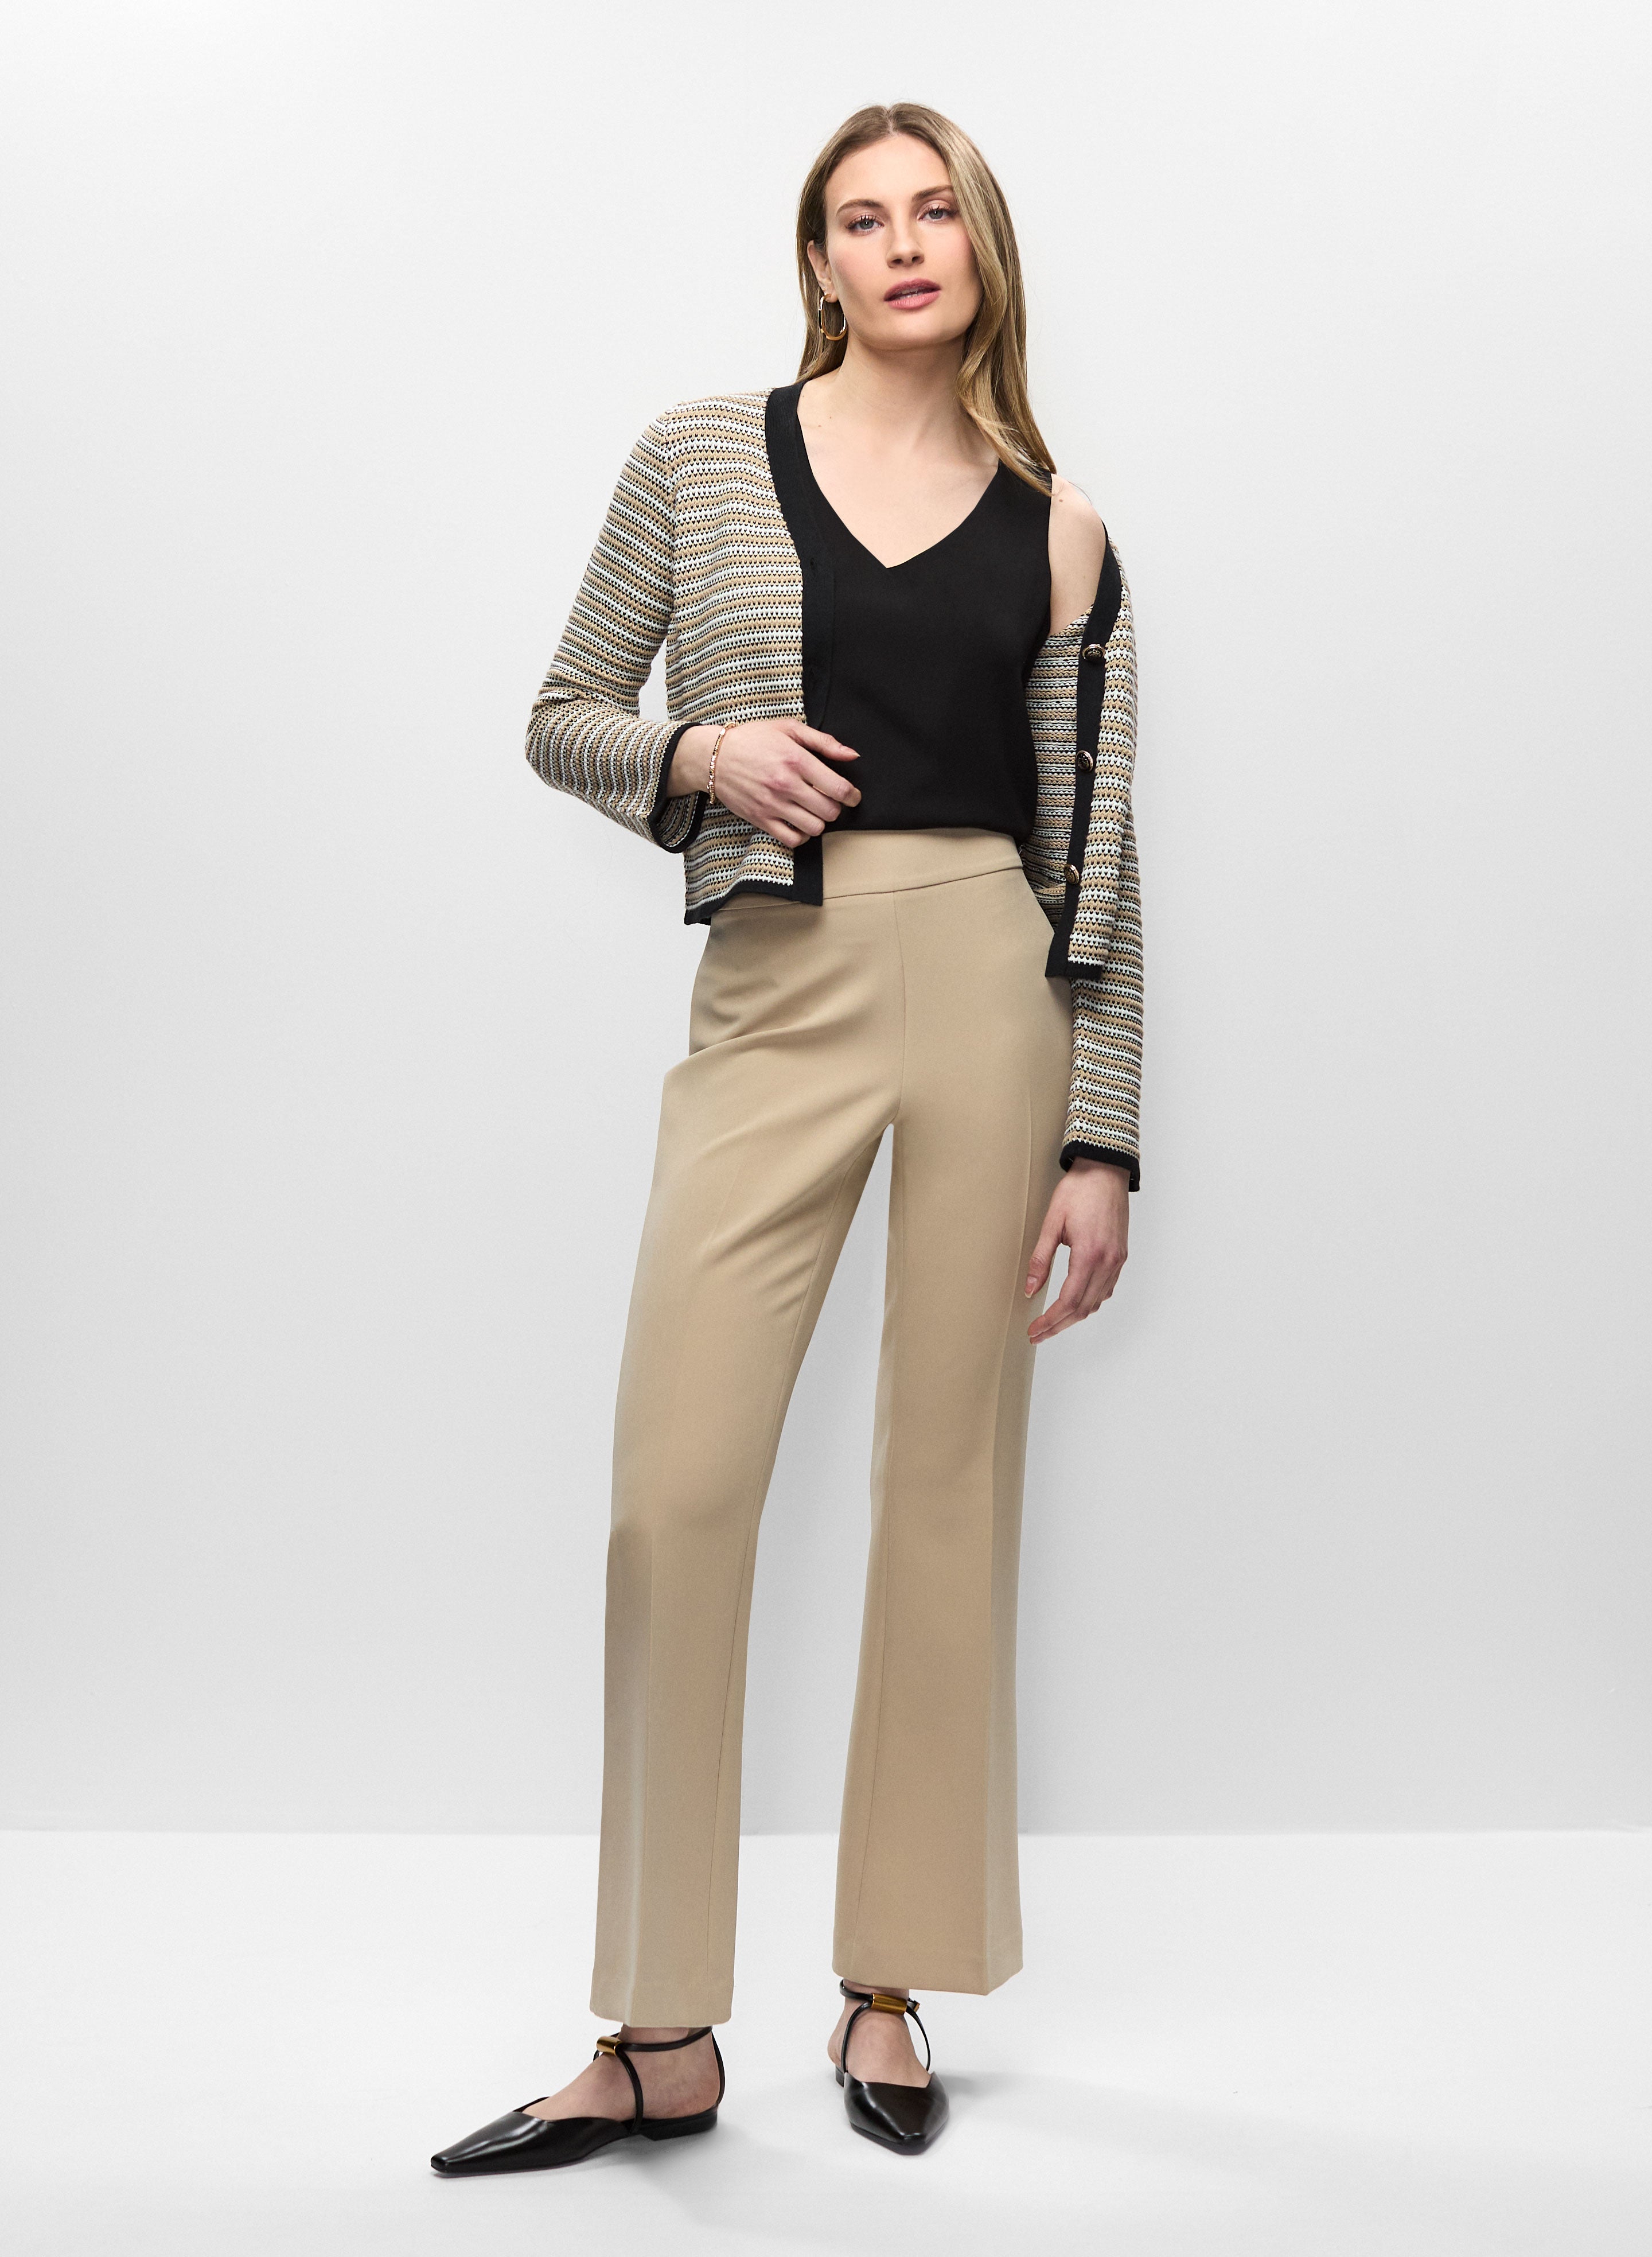 Striped Button Front Cardigan & Flare Leg Pants